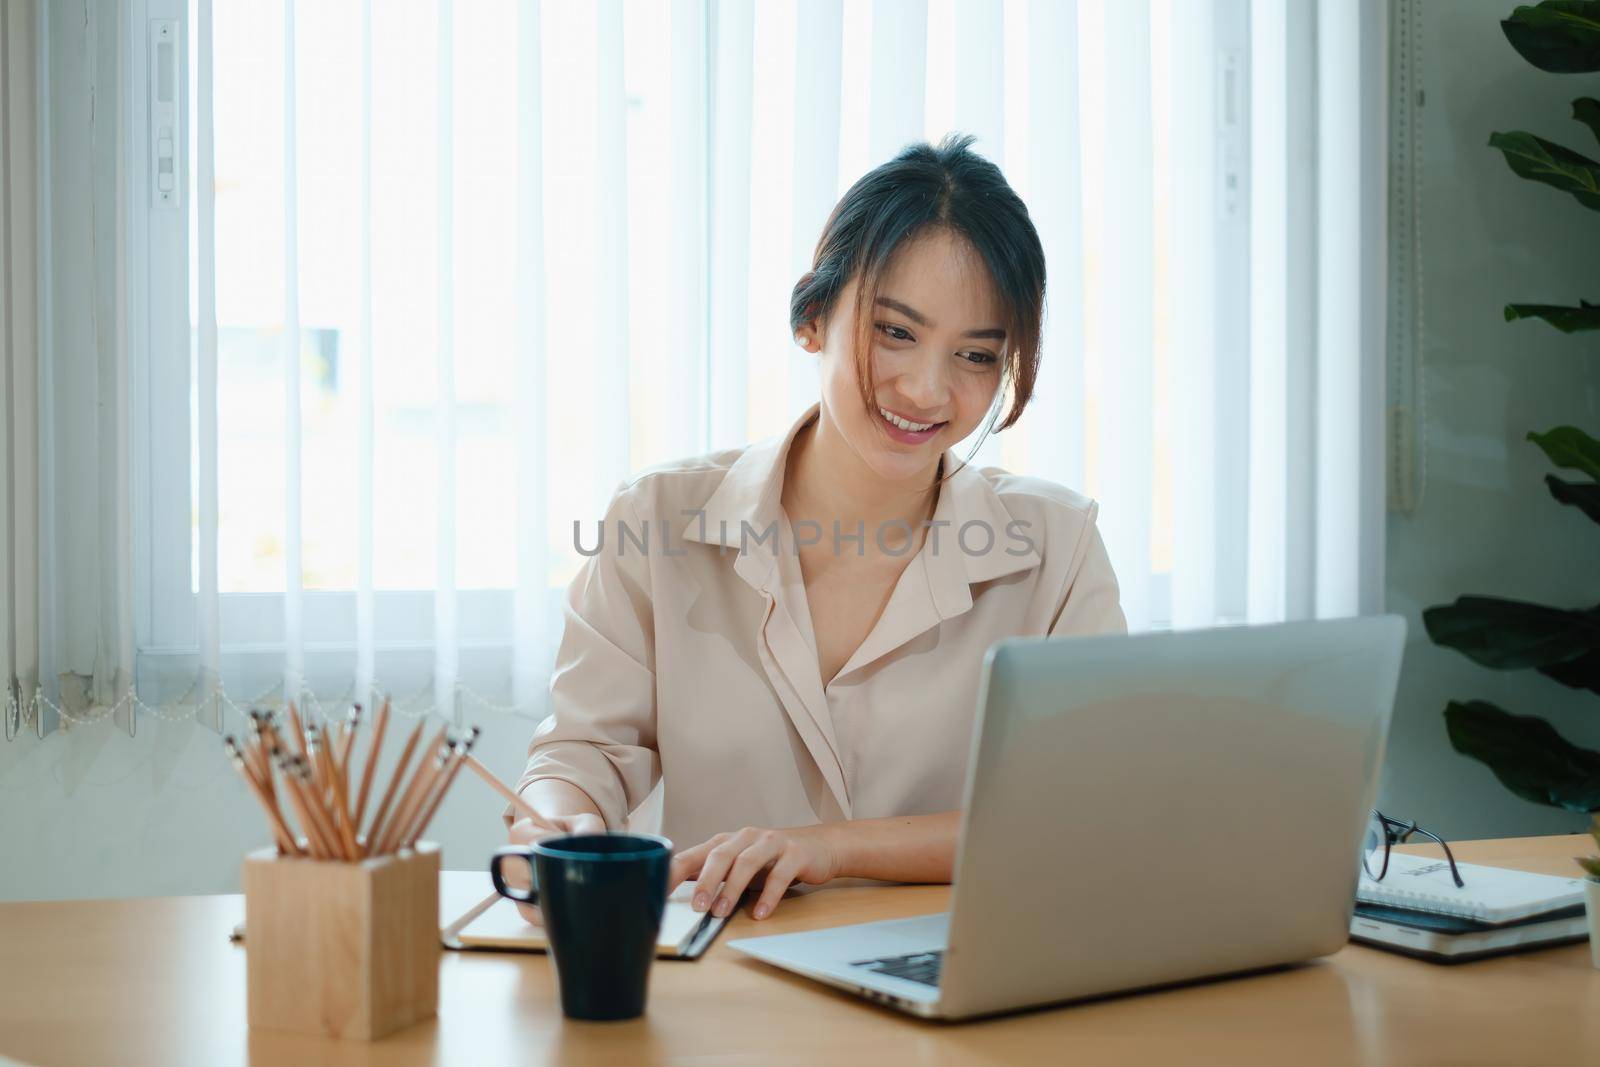 A joyful woman concentrates on a webinar on her laptop computer. by itchaznong